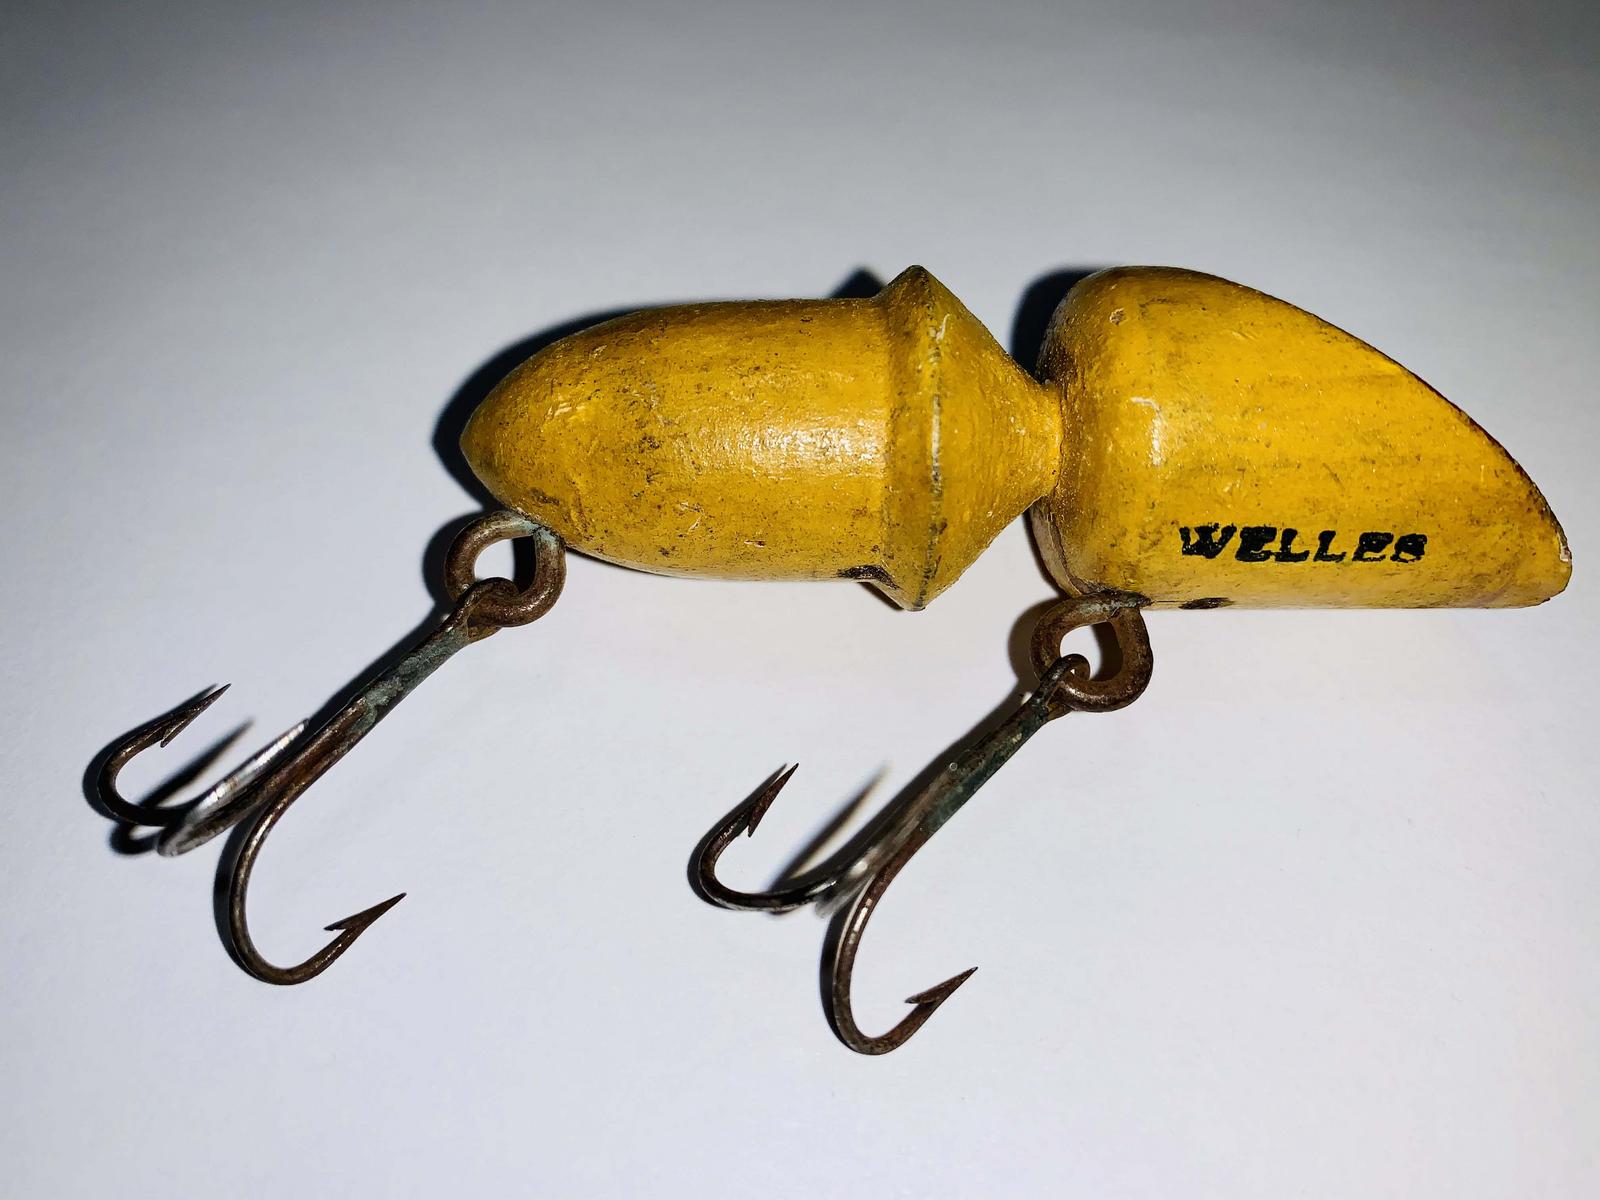 SCARCE CLASSIC EARLY WELLES PATENT BAIT c.1910s